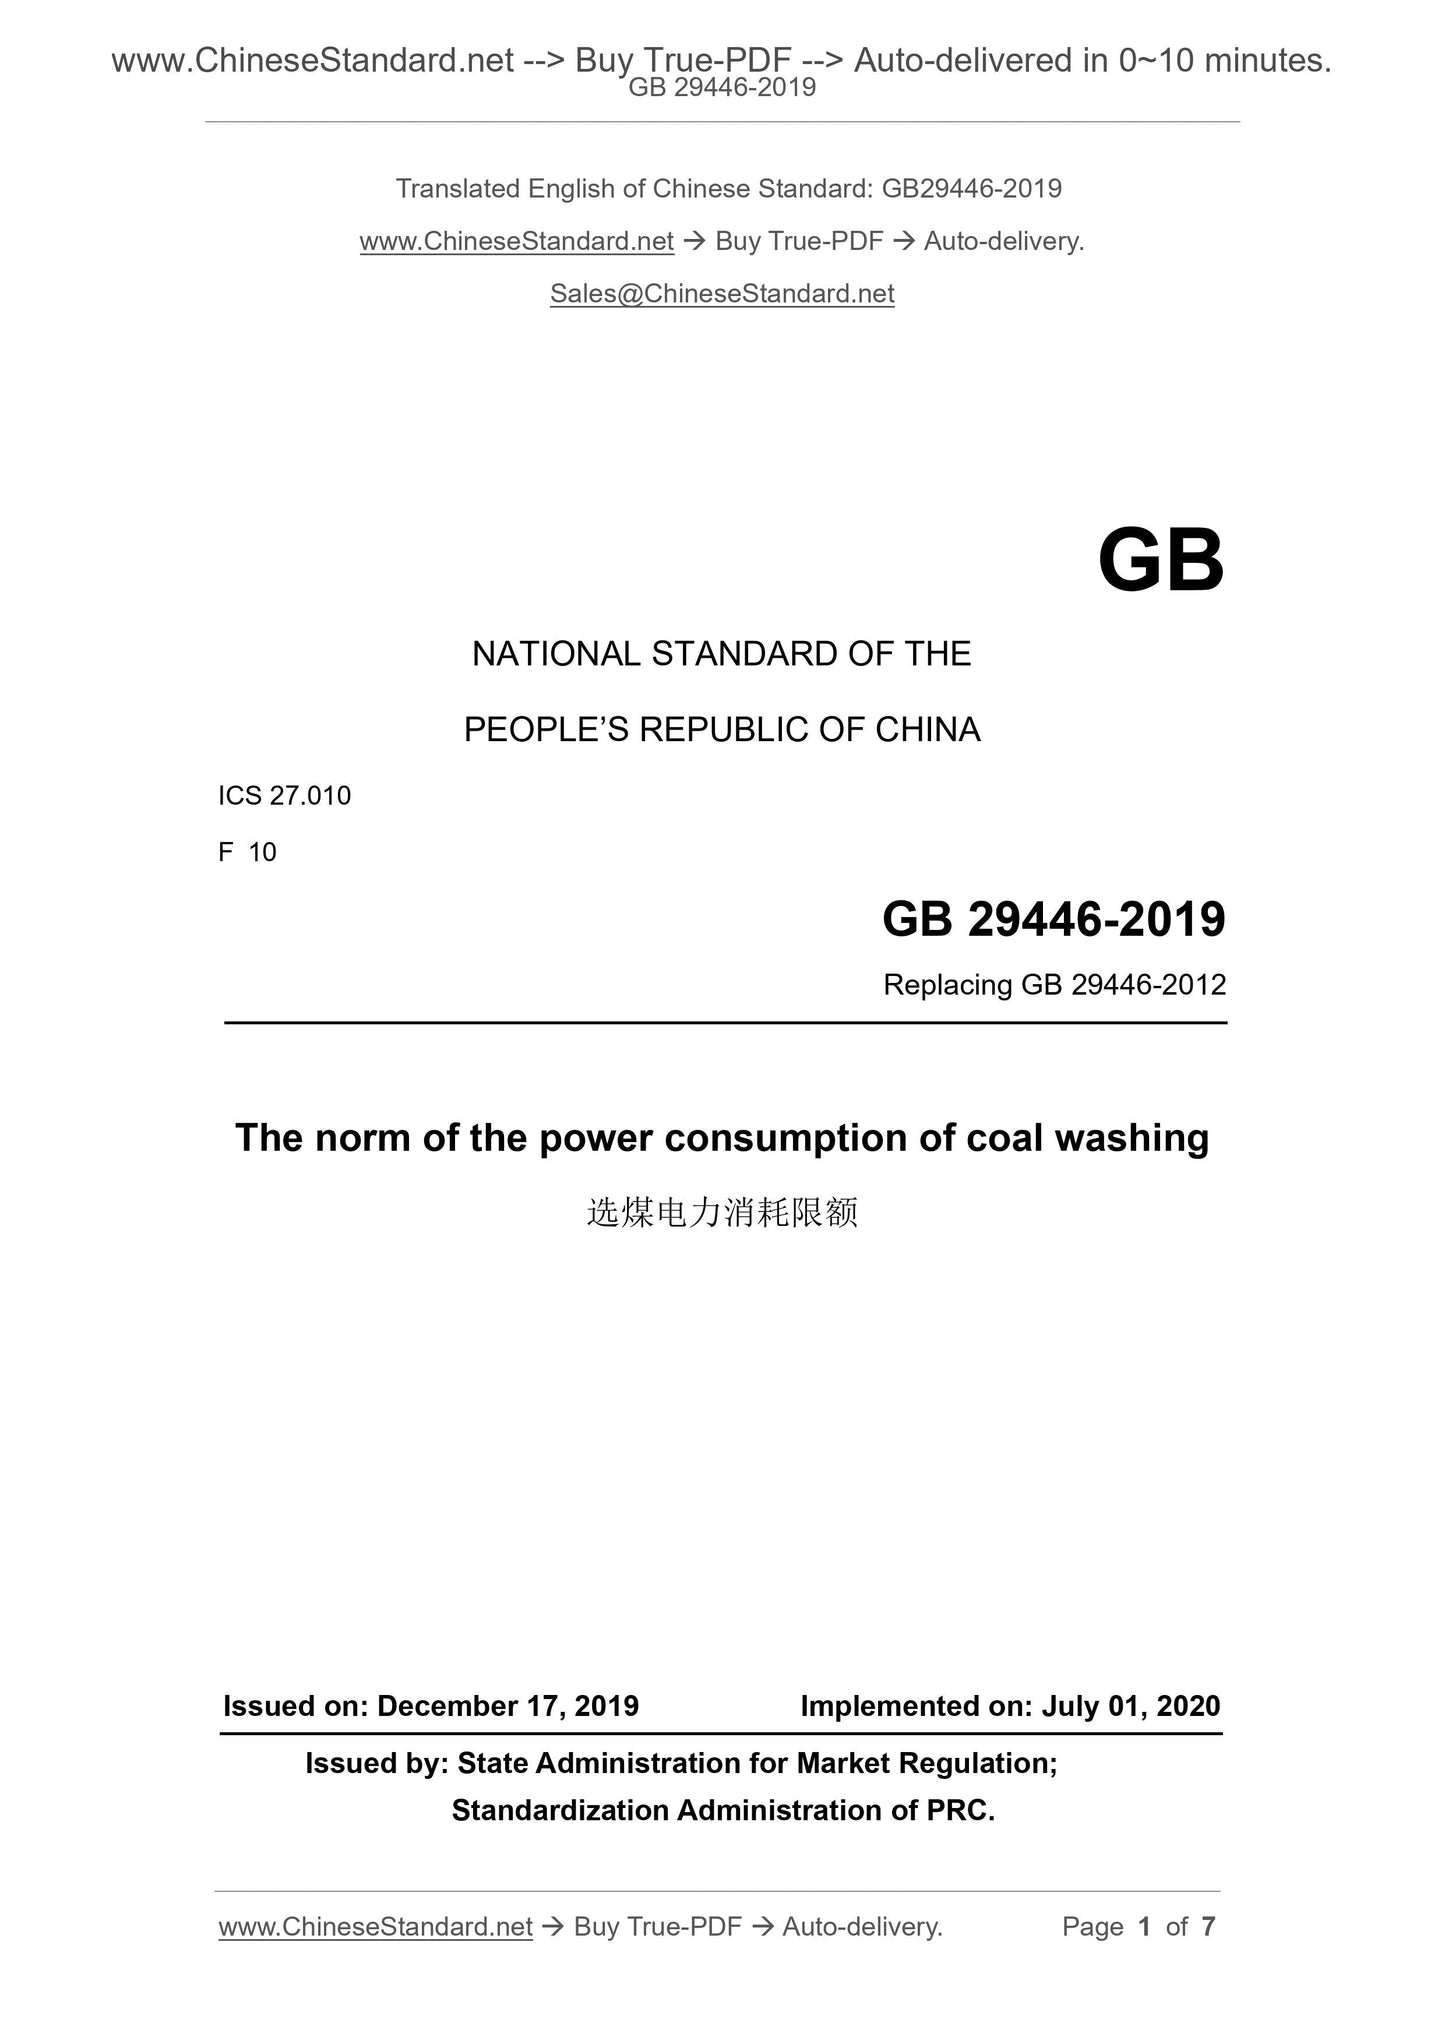 GB 29446-2019 Page 1